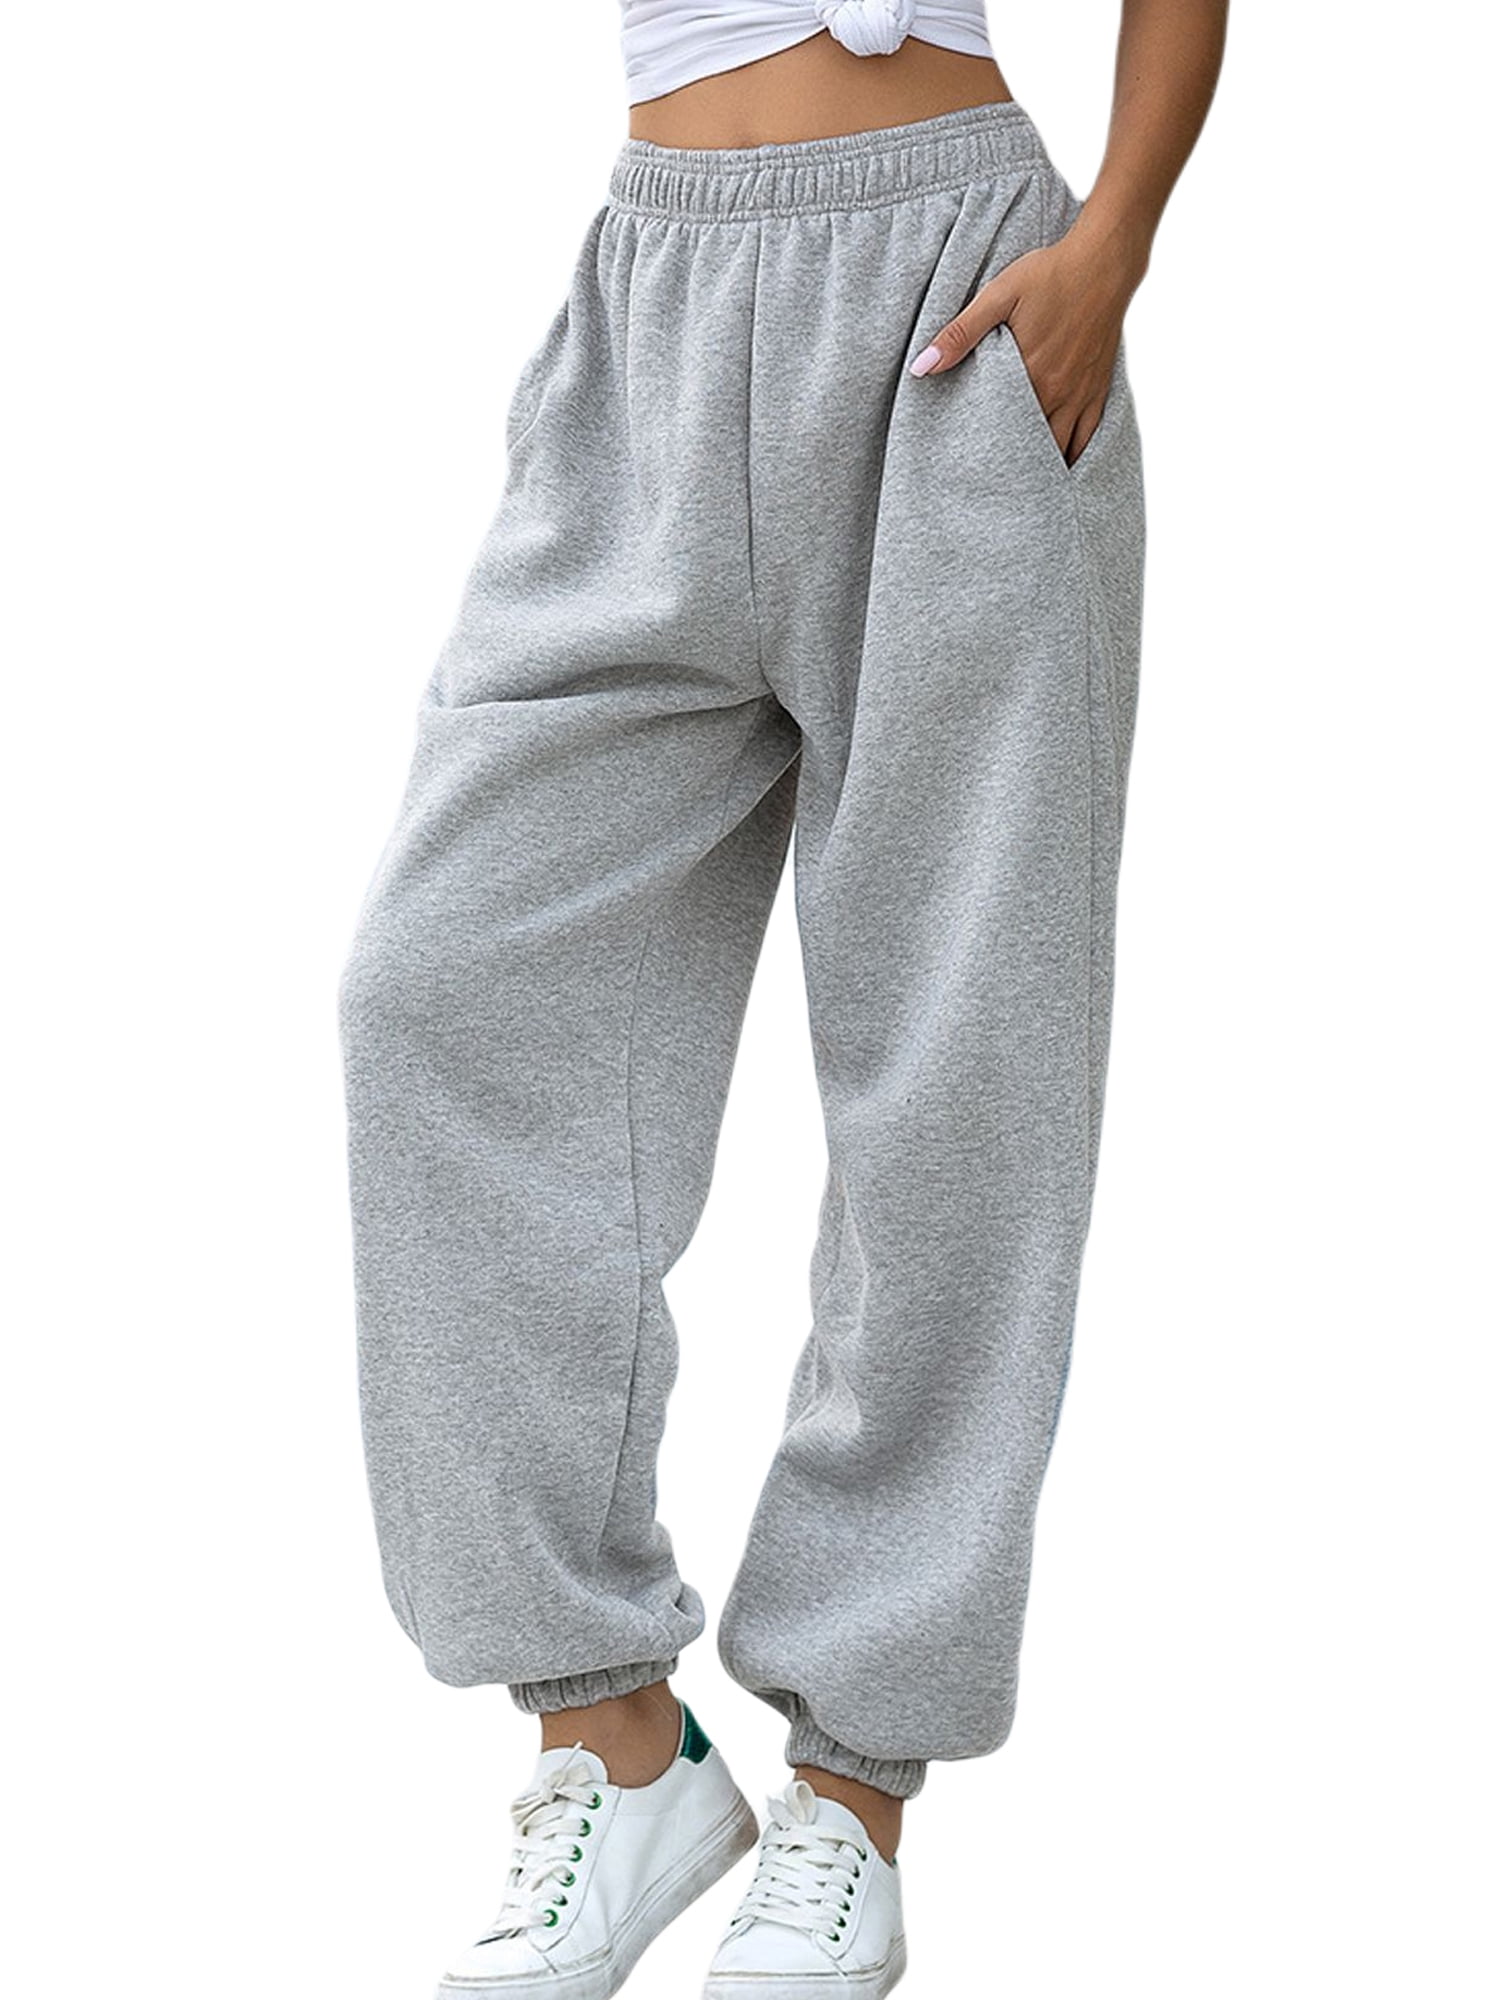 MEROKEETY Womens Active High Waisted Jogger Sweatpants Baggy Lounge Pants with Pockets 